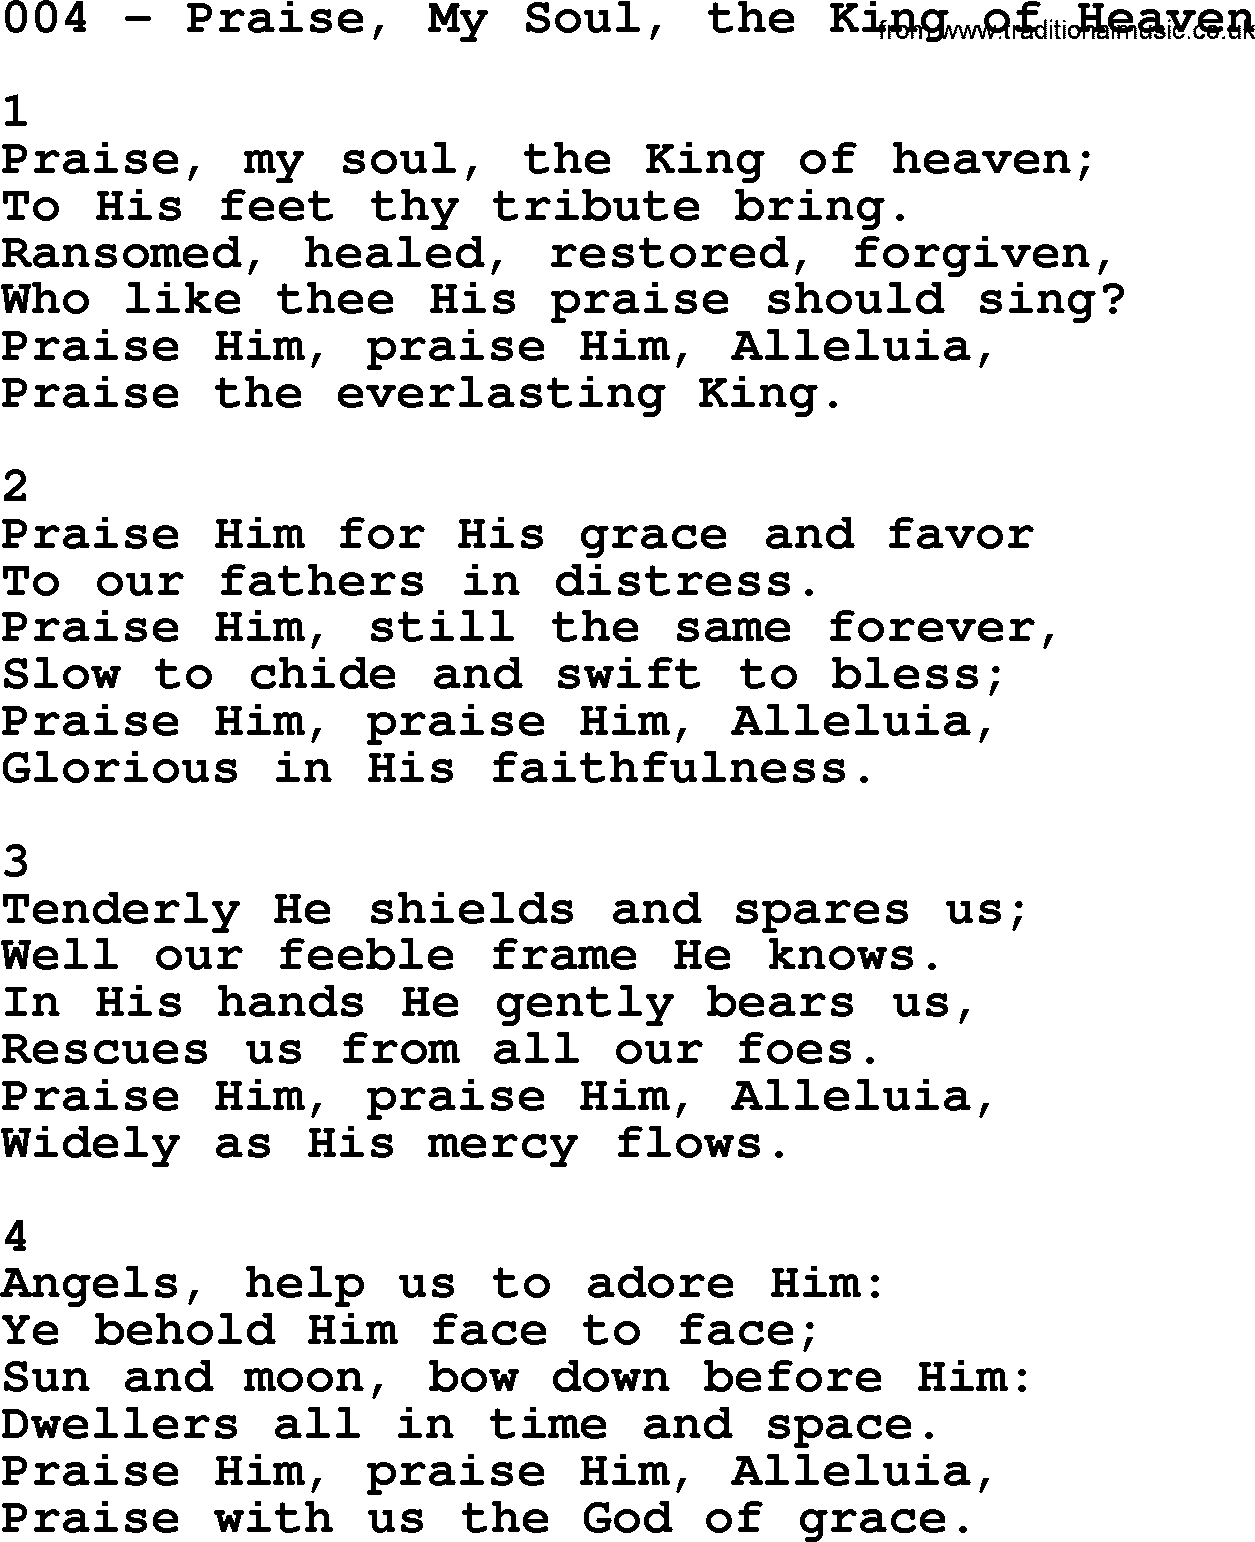 Complete Adventis Hymnal, title: 004-Praise, My Soul, The King Of Heaven, with lyrics, midi, mp3, powerpoints(PPT) and PDF,